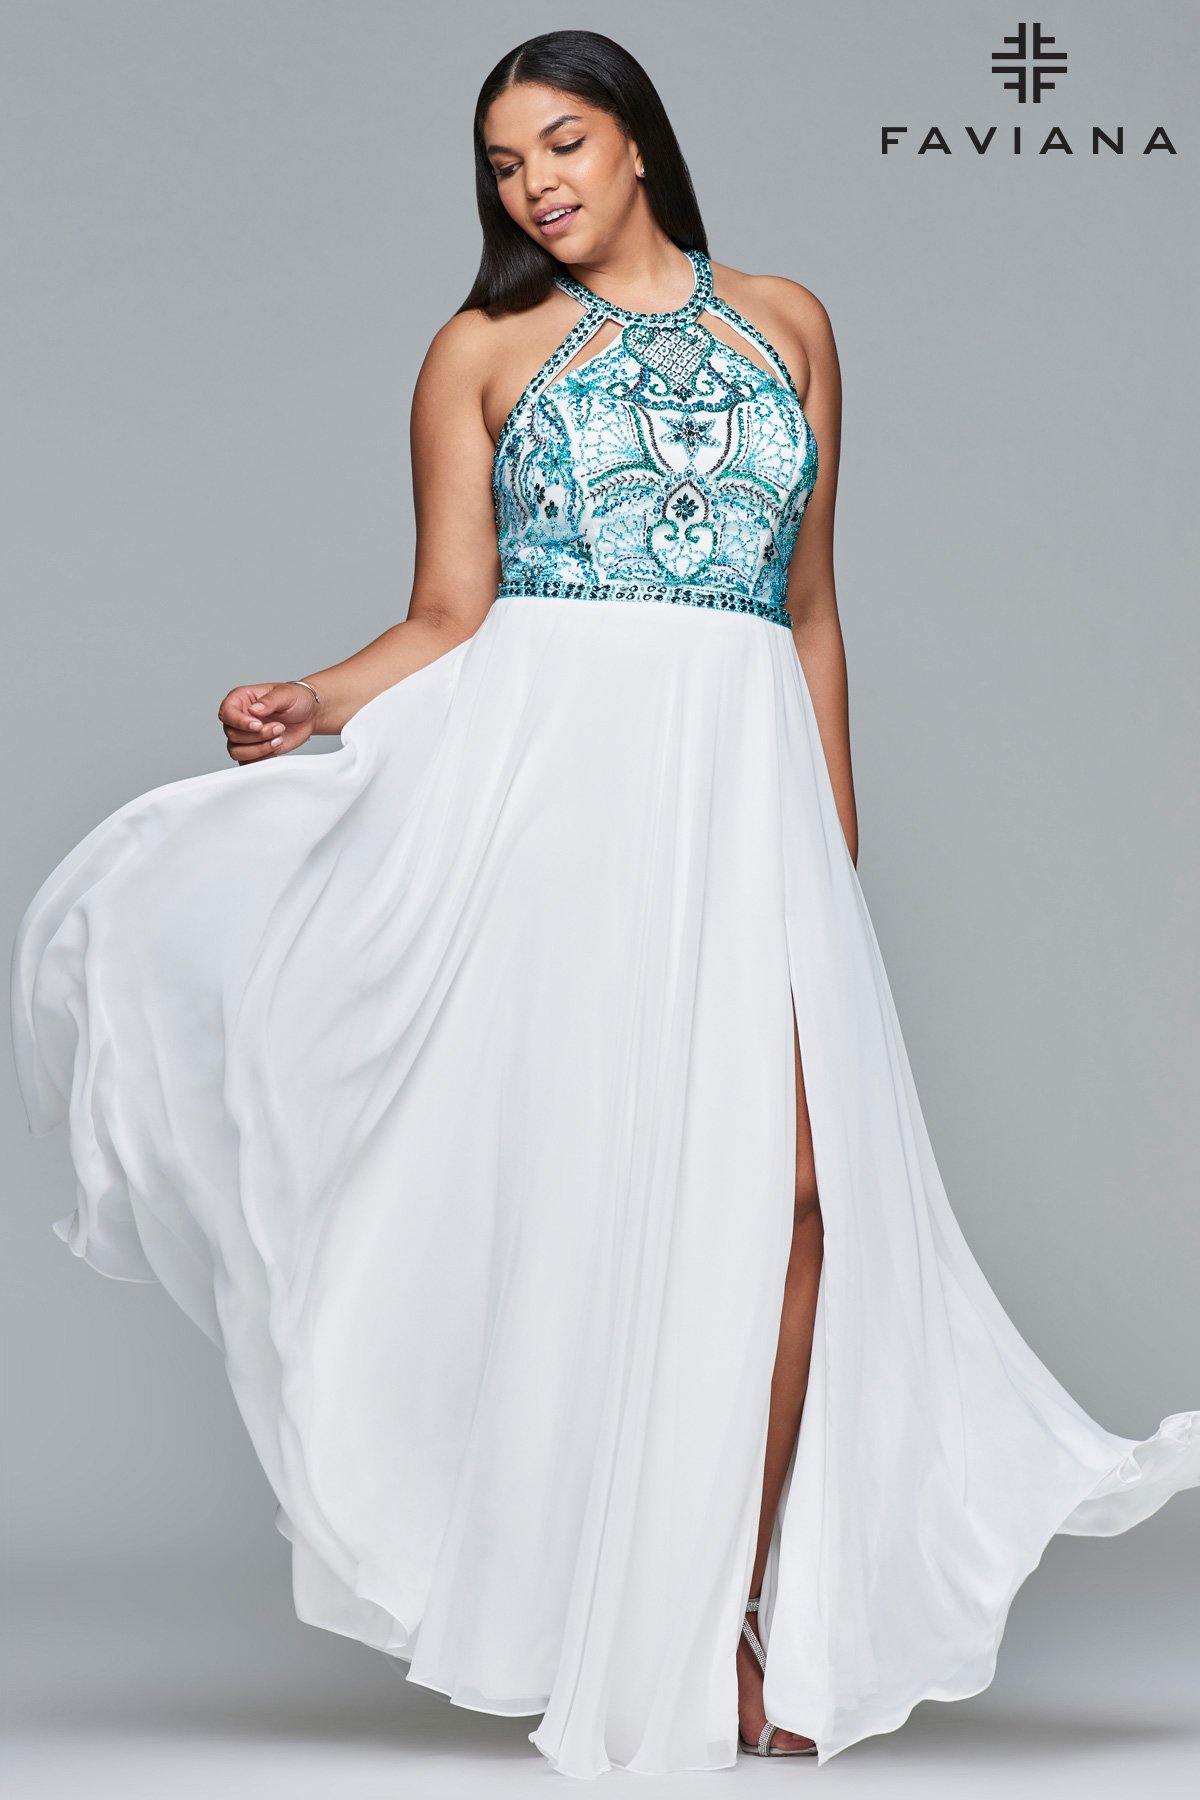 Faviana 9434 Embroidered High Neck A-line Long Formal Dress - The Dress Outlet Faviana